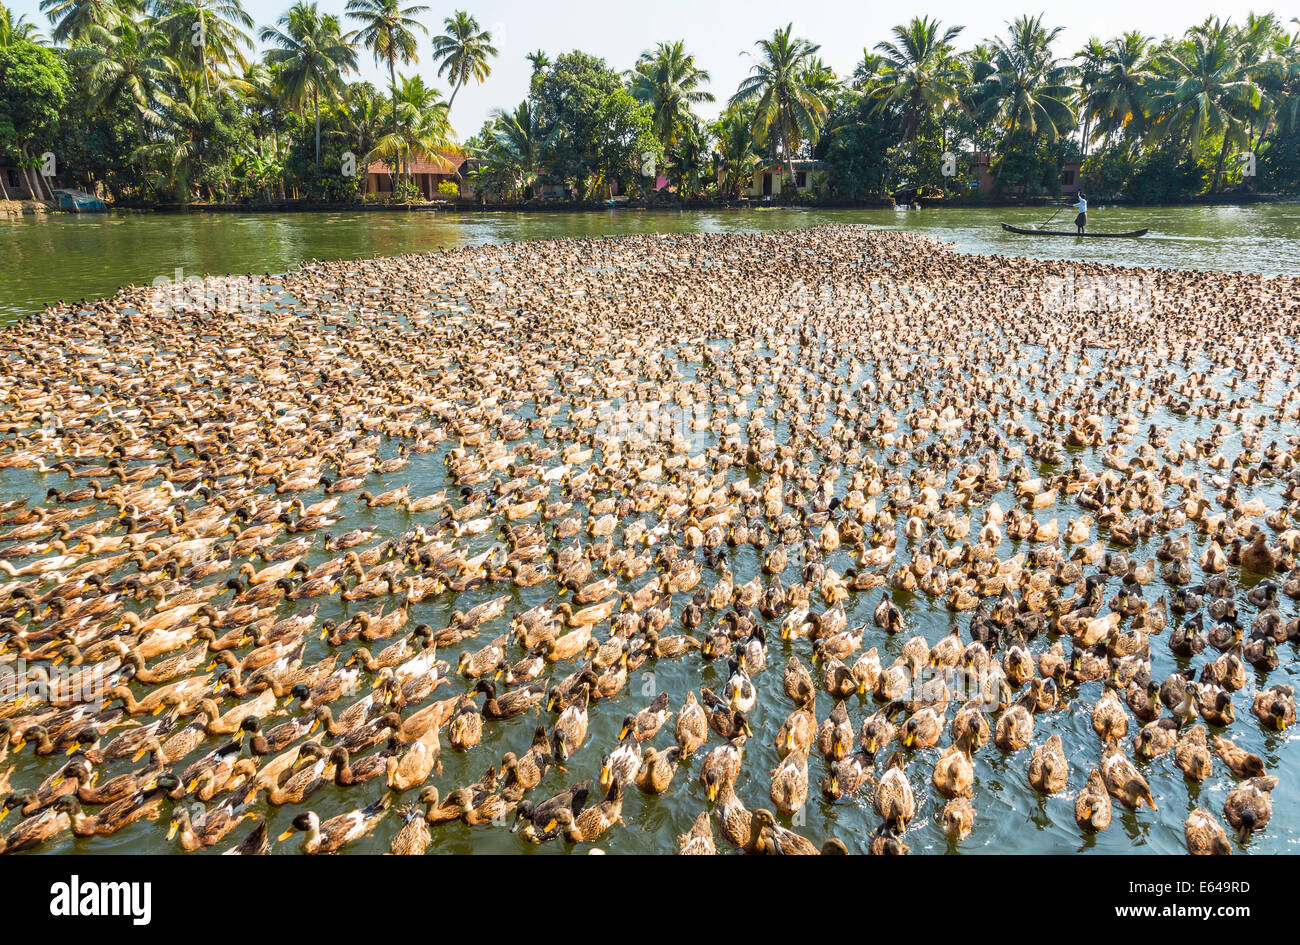 Ducks being herded along the waterway, Kerala backwaters, nr Alleppey, (or Alappuzha), Kerala, India Stock Photo